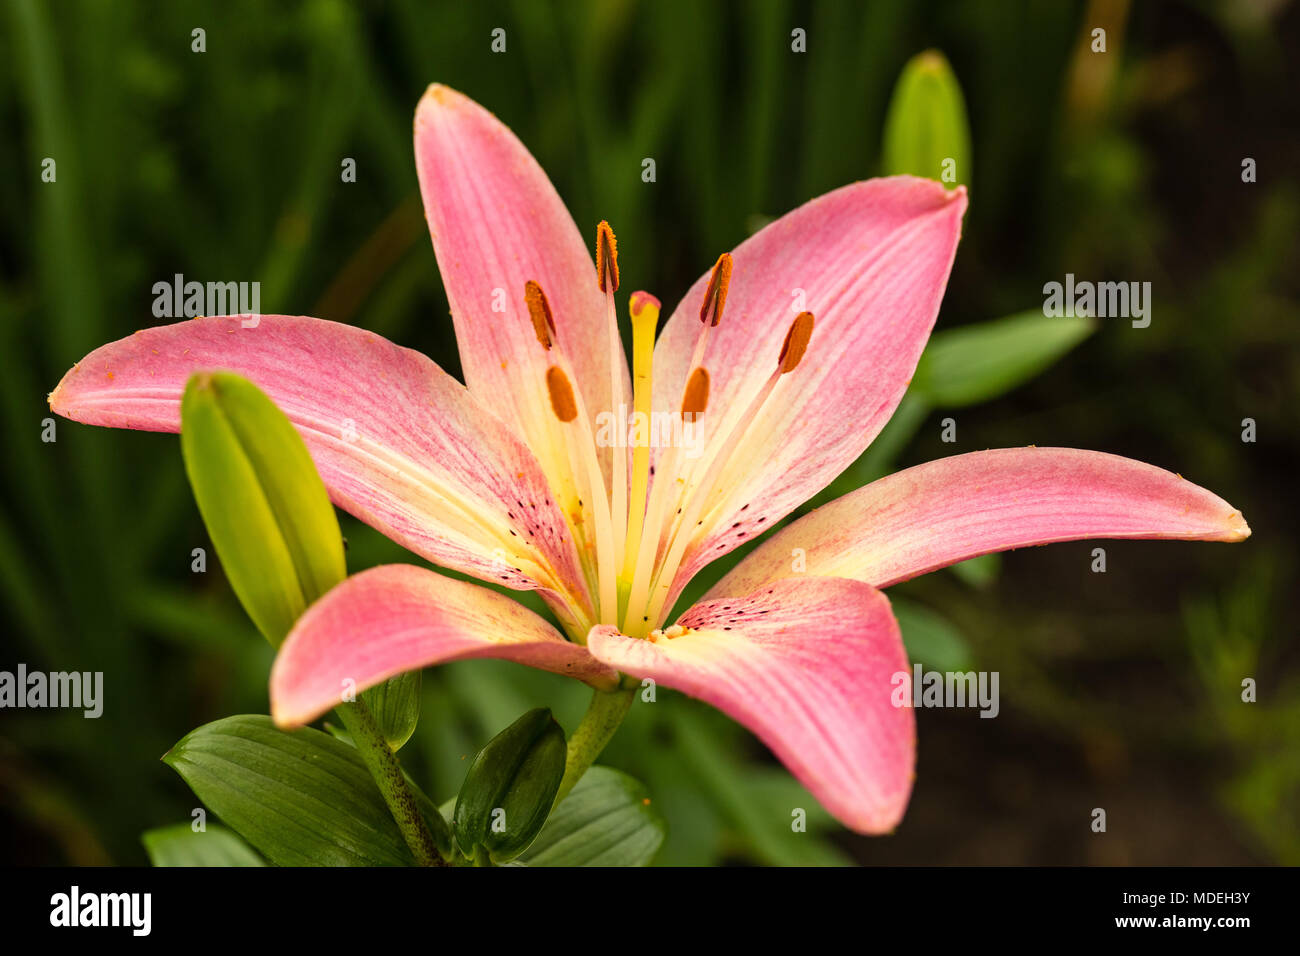 a brilliant pink lily newly opened in the garden Stock Photo